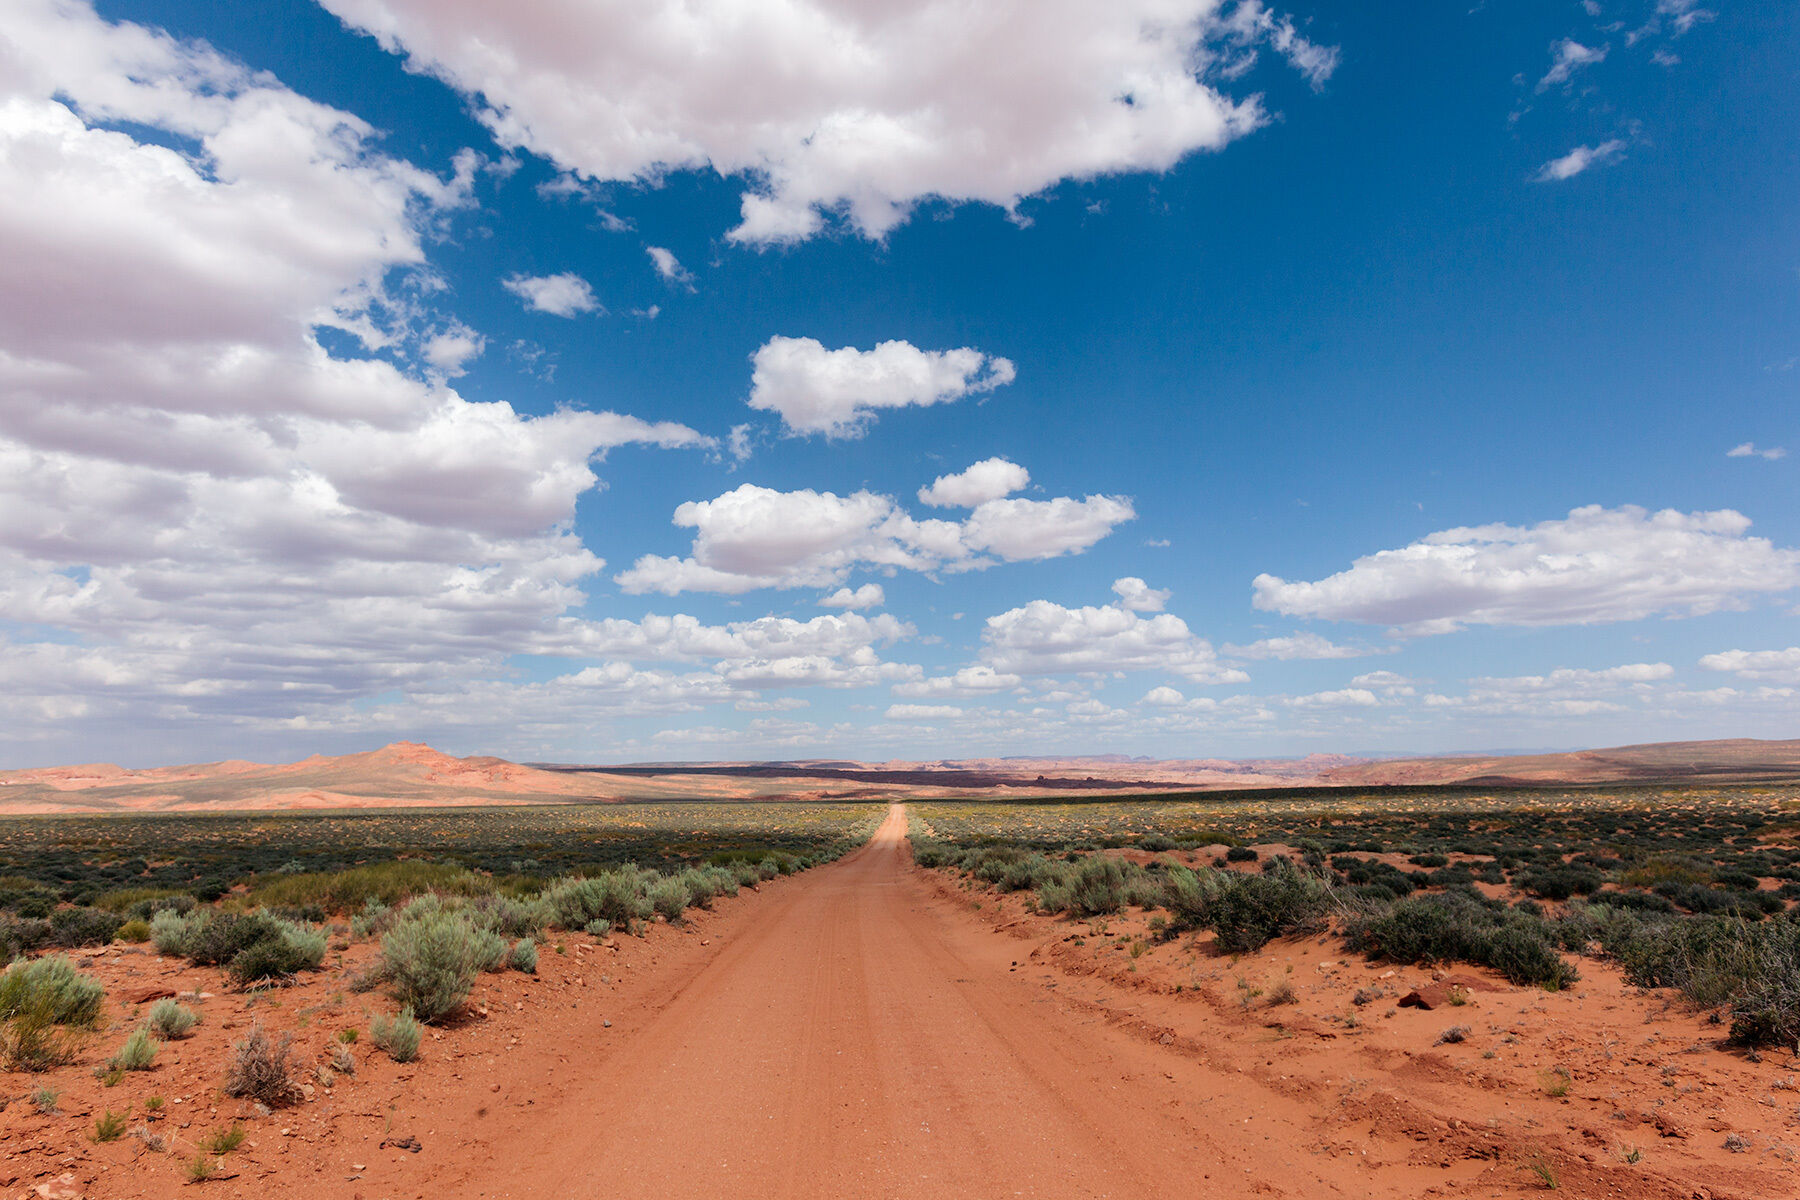 A deep blue sky with big fluffy white clouds, sandstone mountains in the distance, looking down a long desert dirt road in Southern Utah